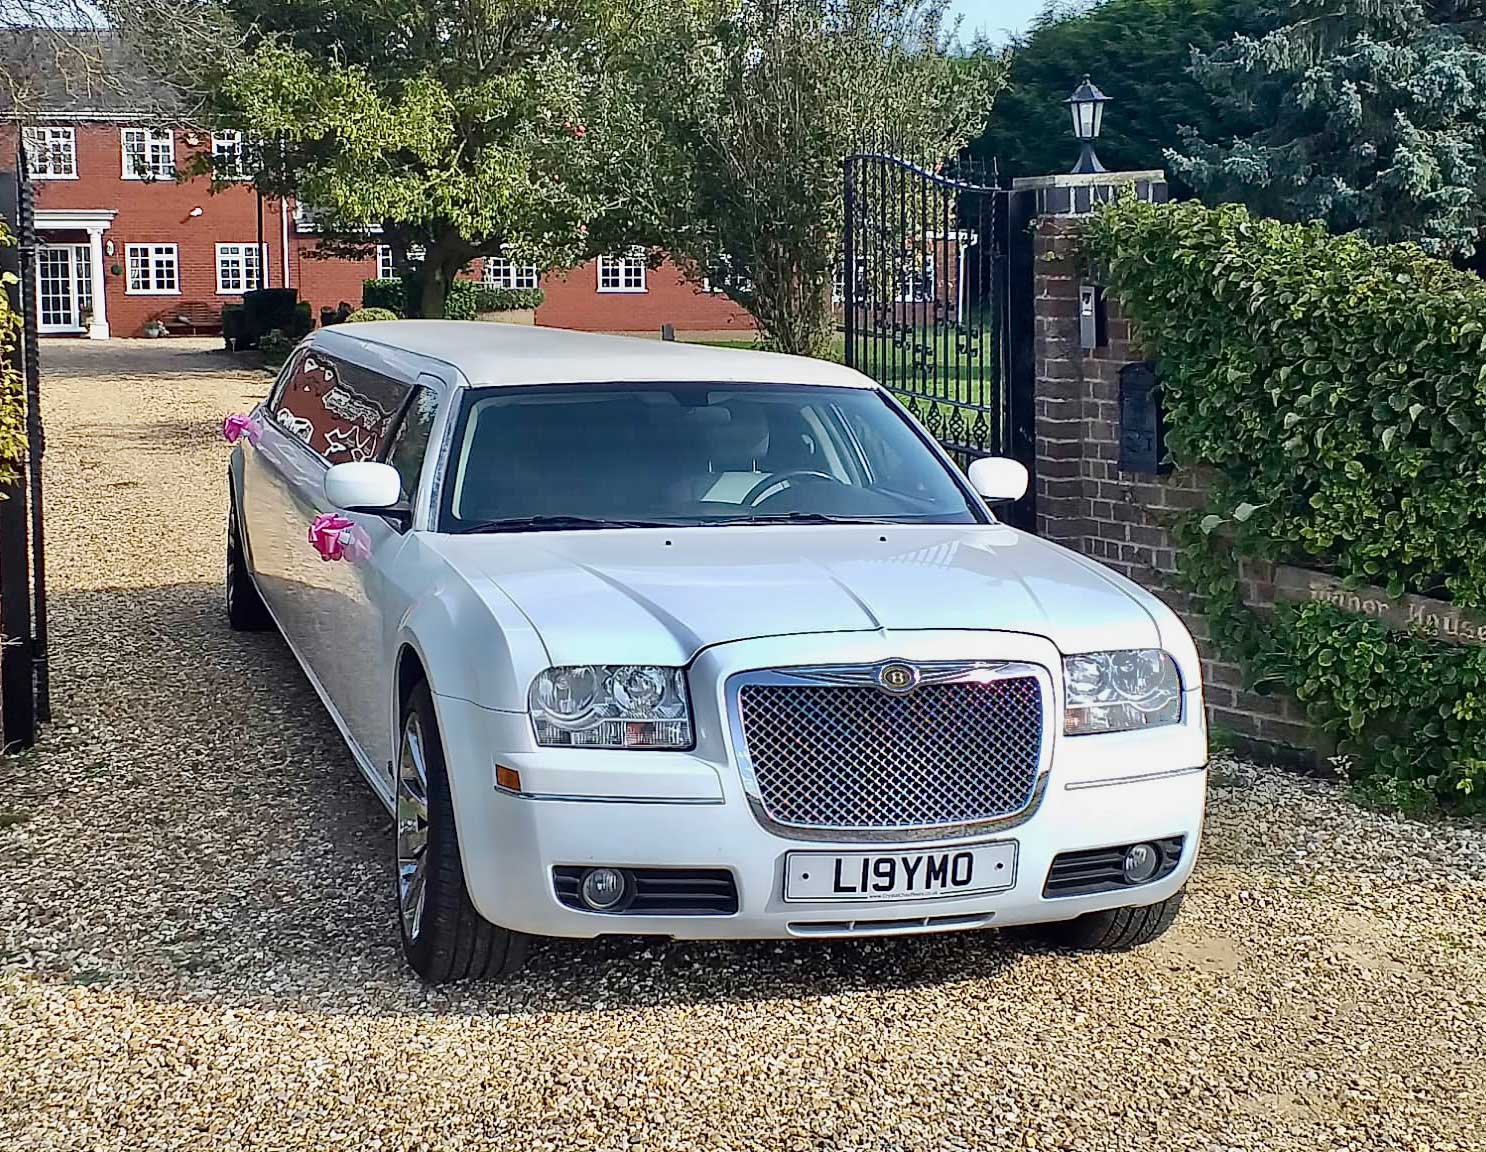 Wedding Limo Hire In King's Lynn